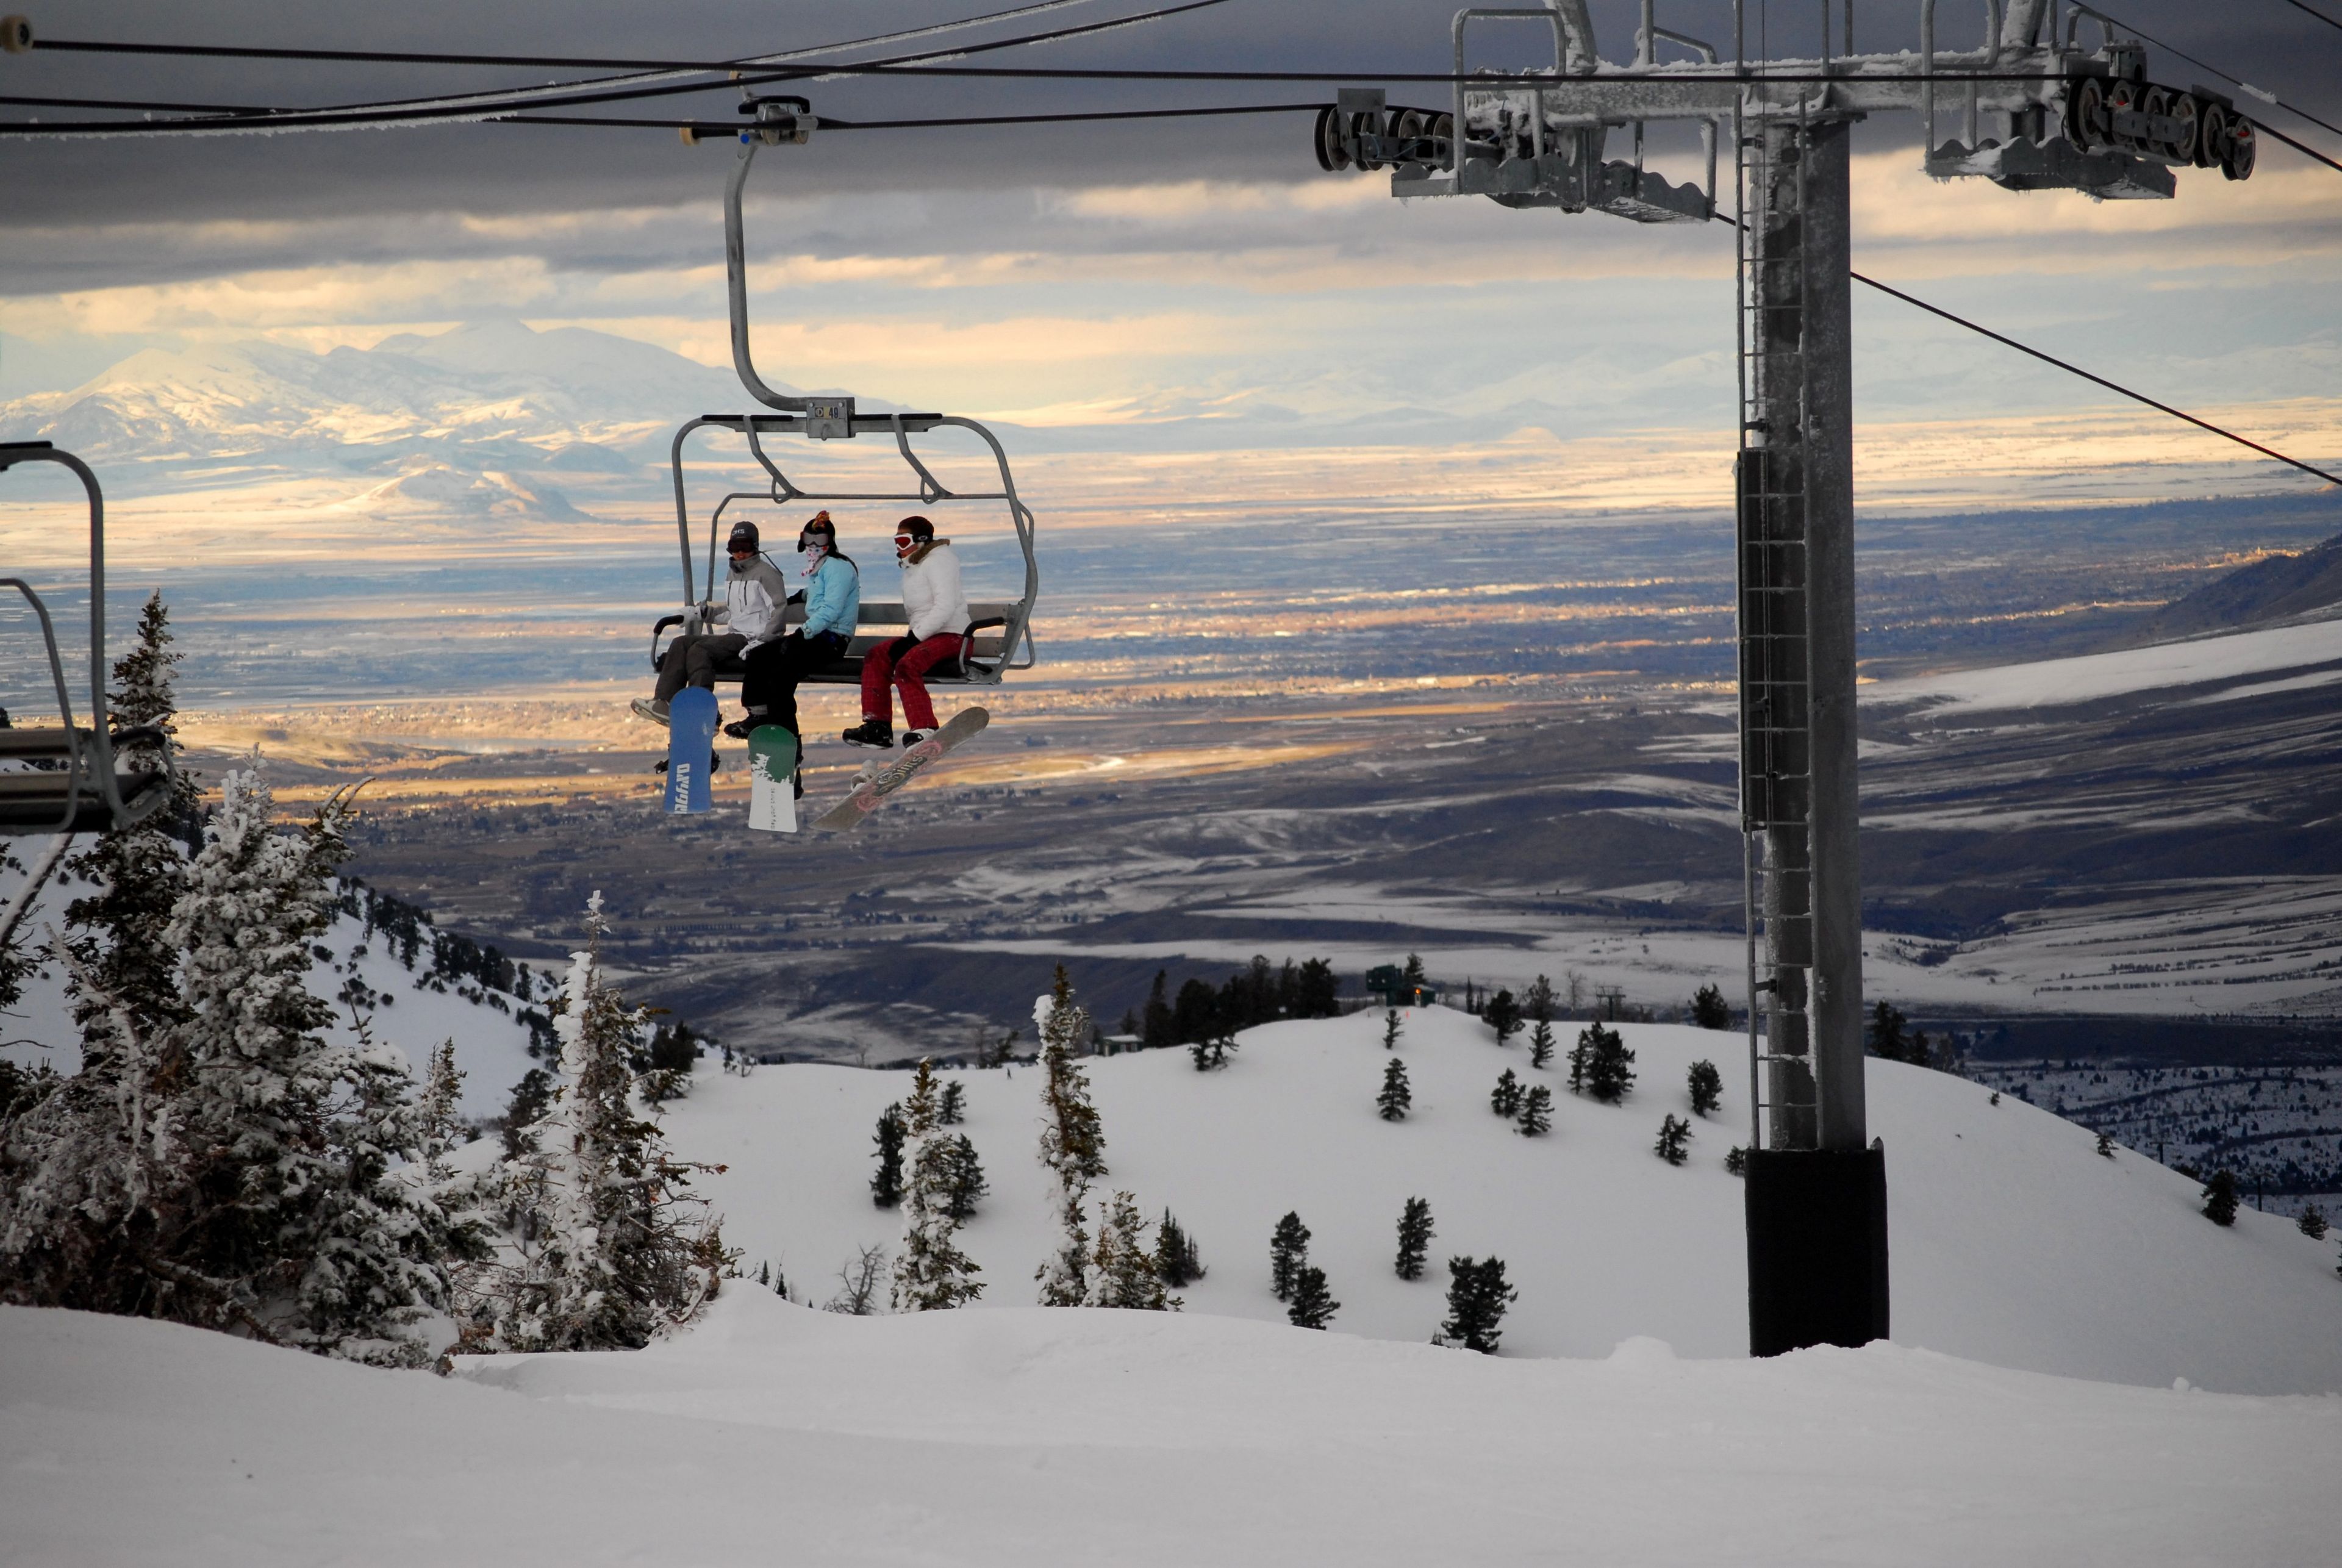 Snowboarders ride the ski lift up the mountain.